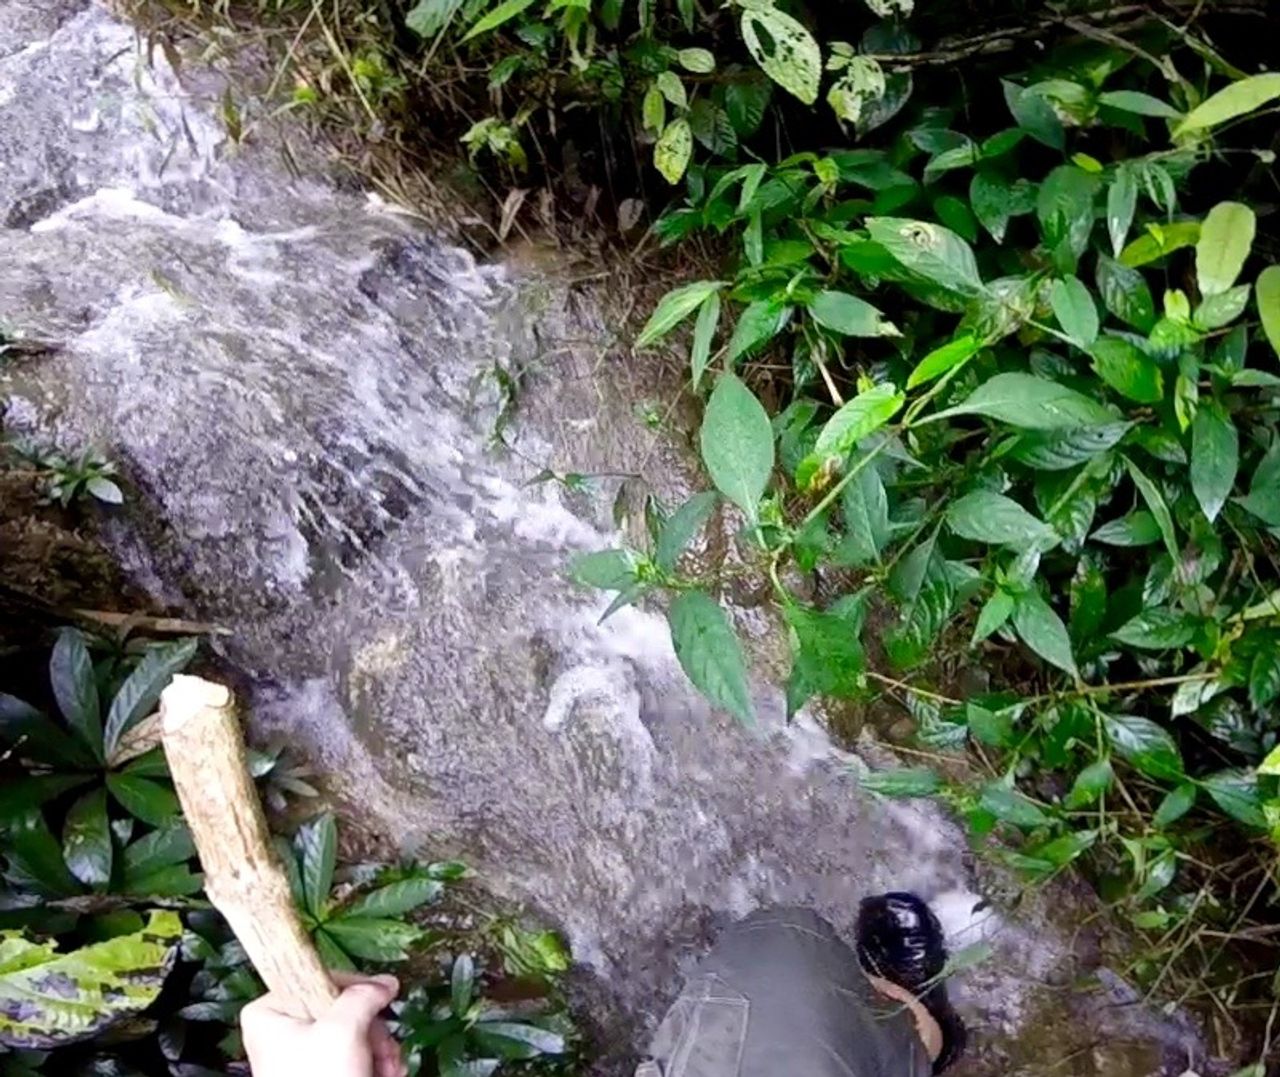 First-person view of a hiker in a waterfall.